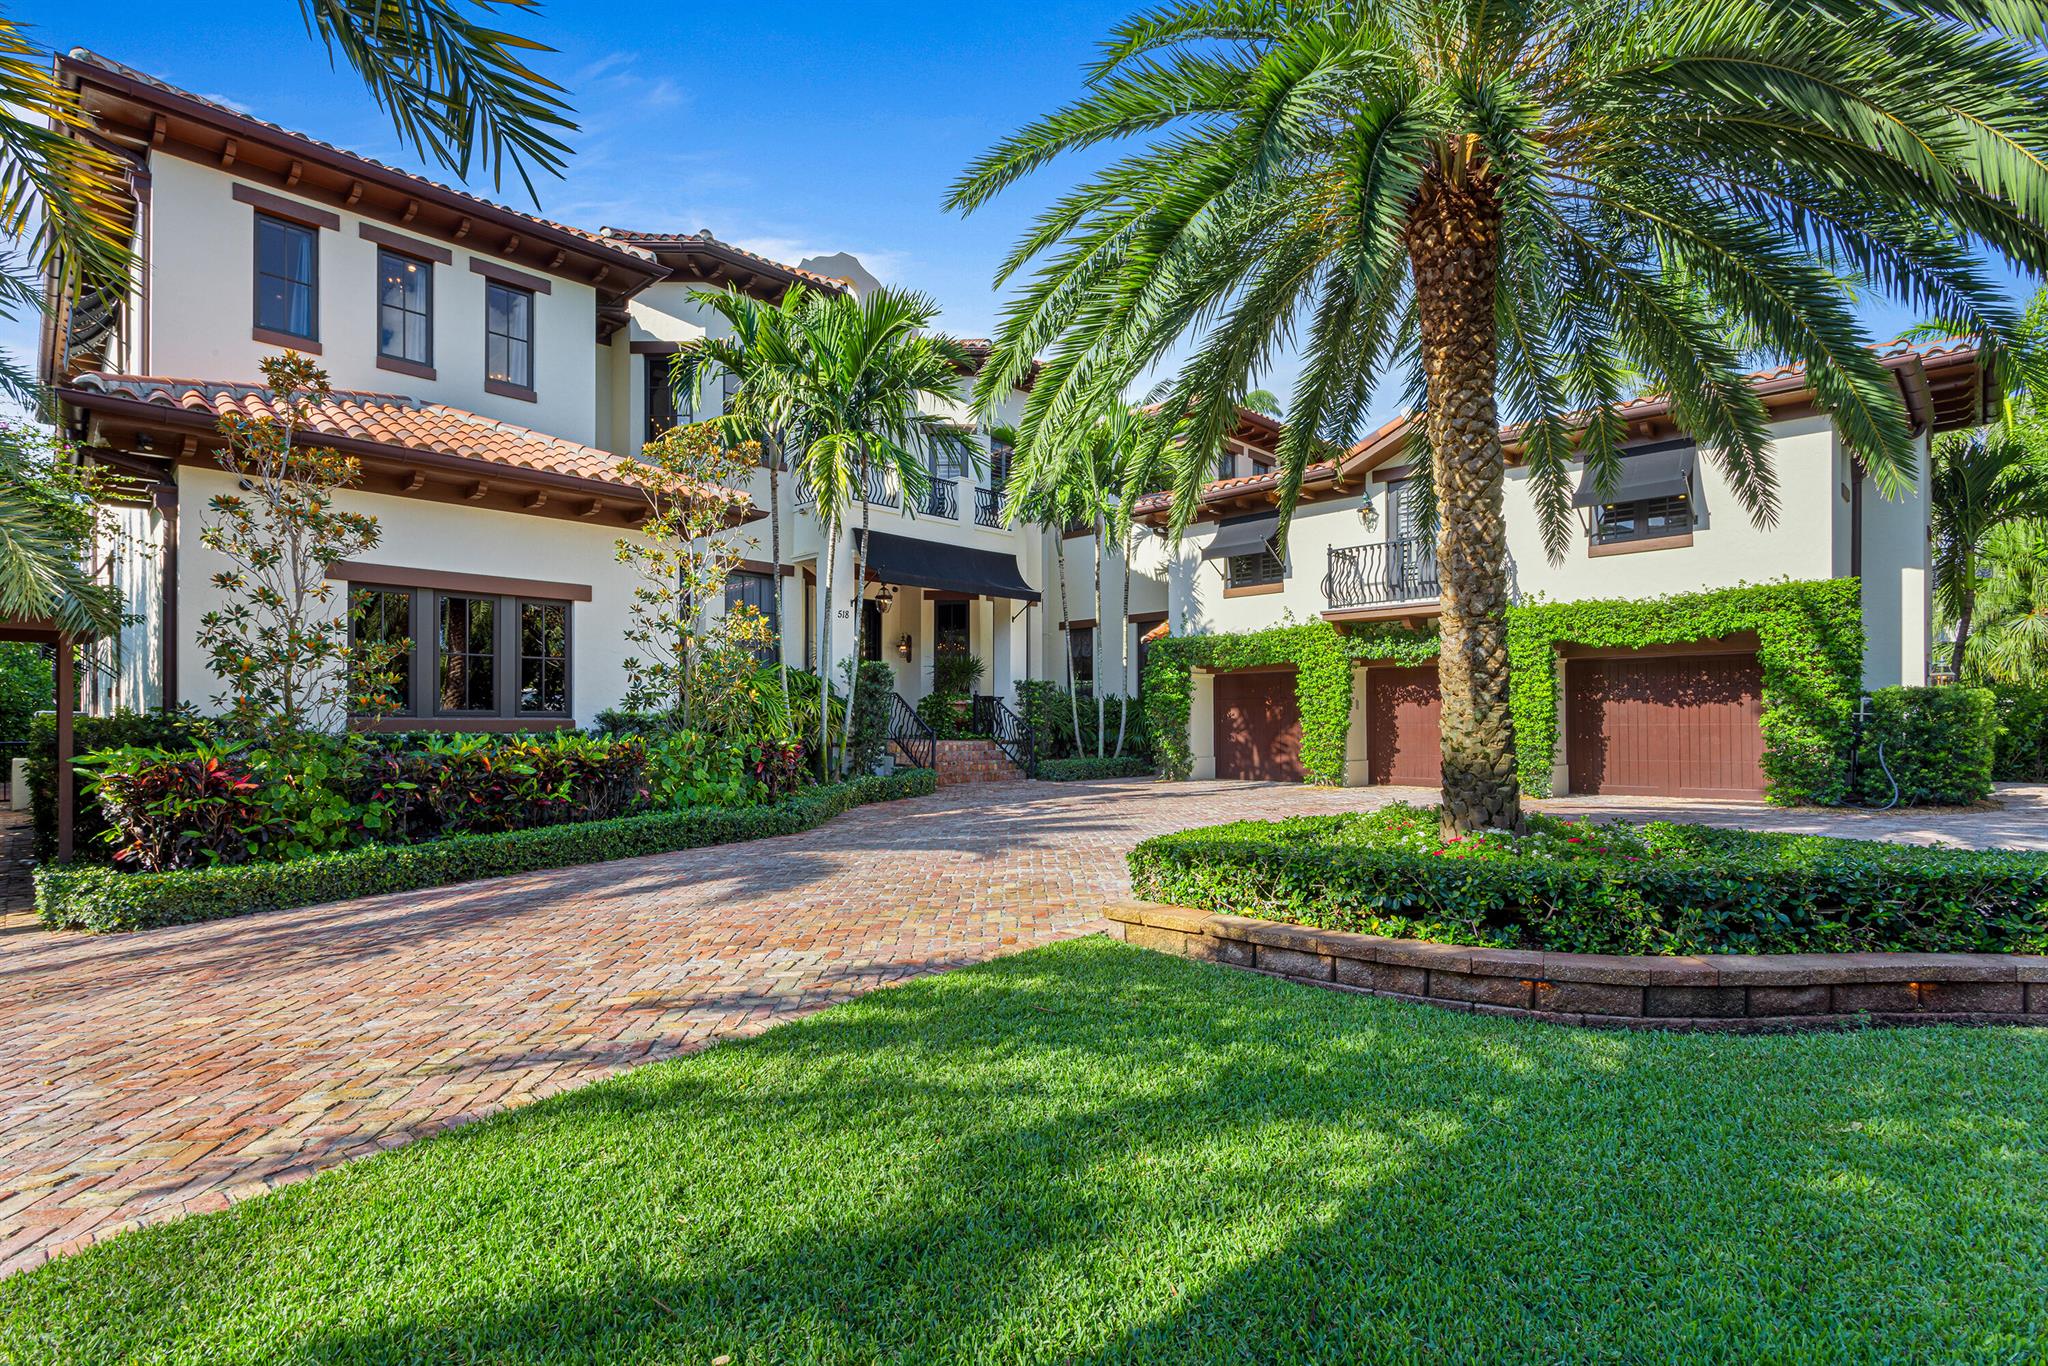 Renovated by GE Architecture and Lost Craft Builders, with no expense spared, this luxe European-style villa is in a private court neighborhood where homeowners share a tennis court and private beach access. Details are pecky-cypress touches, designer-embellished high ceilings, stunning brick-clad accent walls, and floors made with imported French roof tiles. Amenities include a home-theatre, wine cellar, and guesthouse. LOCATION: 

518 Harbor Court, Delray Beach, Florida: In prestigious Delray Ocean Estates North, a private court enclave, across from Delray Beach's award-winning beach, homeowners share a tennis court and private beach access.

PROPERTY: 
 
Enveloped in tropical landscaping shaded by mature Florida gumbo-limbo trees and palms, a Chicago-brick driveway leads to the courtyard entry and two-car garage. In the hedged backyard, the large loggia, with automatic hurricane-tested screens and a pecky-cypress ceiling, incorporates eating and dining areas along with the summer kitchen with a DCS Grill, sink and refrigerator. Just adjacent are the turf-carpeted putting green, conversation/dining firepit, and the large saltwater heated pool with a waterfall and spill-over spa. 

RESIDENCE: 

Presenting a European-Villa aesthetic, this elegant six-bedroom estate, with 9,744 +/ total square feet, was completely renovated by Gary Eliopoulos, of GE Architecture and Lost Craft Builders. Details throughout include pecky-cypress finishes, designer-embellished high ceilings, stunning brick-clad accent walls, and floors made with imported French roof tiles. Handsome glass double doors with a wrought-iron grillwork open to the foyer that flows out to the great room. Features here include an impressive pecky-cypress beamed ceiling and sliding doors opening to the loggia overlooking the pool. Inviting entertaining, an intimate brick-clad, pecky-cypress-topped wine room is completed with a 475-bottle temperature/humidity-controlled wine cellar. The library is fitted with built-in cabinetry, beautiful wood trim work, and an ensuite bathroom with a sauna and steam shower. The cook-island kitchen, with a charming breakfast bay, is finished with custom wood Mouser Cabinetry, Taj Mahal quartz counters and two large sinks with Rohl faucets. Appliances include a refrigerator, freezer, two dishwashers, coffee center, convection/microwave and steam oven all by Miele. A SubZero refrigerator, Scotsman icemaker, and Speed Queen washer and dryer are in the adjoining pantry. The home theatre has eight reclining theatre chairs and plush leopard-printed velvet walls. The first-floor VIP suite includes a bedroom that opens to the pool loggia,  an ensuite bathroom, and a private sunroom. On the second floor are the primary suite, three decorator-curated guest-bedroom suites, and gym. Set apart in a wing of its own, the primary suite is an oasis of tranquility, featuring a morning bar, two custom-fitted walk-in closets, and a quartz-clad spa-inspired bathroom with custom cabinetry, dual sinks, Jacuzzi tub and steam shower. The primary bedroom includes a gym/office that open to a pool-view wraparound terrace, with a deck extension on the primary bedroom wing. Completing the layout are two laundry rooms, powder room and elevator, and over the attached two-car garage is a guesthouse/game room with a bathroom and efficiency kitchen. Amenities include a Lutron lighting system,  impact-glass windows and doors, full-house generator, barrel-tile roof, and natural gas accommodation. New this year are Lennox air conditioners,  reverse osmosis water system, and pool equipment.  


The information herein is deemed reliable and subject to errors, omissions or changes without notice.  The information has been derived from architectural plans or county records. Buyer should verify all measurements.

DISCLAIMER: Information published or otherwise provided by the listing company and its representatives including but not limited to prices, measurements, square footages, lot sizes, calculations, statistics, and videos are deemed reliable but are not guaranteed and are subject to errors, omissions or changes without notice. All such information should be independently verified by any prospective purchaser or seller. Parties should perform their own due diligence to verify such information prior to a sale or listing. Listing company expressly disclaims any warranty or representation regarding such information. Prices published are either list price, sold price, and/or last asking price. The listing company participates in the Multiple Listing Service and IDX. The properties published as listed and sold are not necessarily exclusive to listing company and may be listed or have sold with other members of the Multiple Listing Service. Transactions where listing company represented both buyers and sellers are calculated as two sales. The listing company's marketplace is all of the following: Vero Beach, Town of Orchid, Indian River Shores, Town of Palm Beach, West Palm Beach, Manalapan Beach, Point Manalapan, Hypoluxo Island, Ocean Ridge, Gulf Stream, Delray Beach, Highland Beach, Boca Raton, East Deerfield Beach, Hillsboro Beach, Hillsboro Shores, East Pompano Beach, Lighthouse Point, Sea Ranch Lakes and Fort Lauderdale. Cooperating brokers are advised that in the event of a Buyer default, no financial fee will be paid to a cooperating Broker on the Deposits retained by the Seller. No financial fees will be paid to any cooperating broker until title passes or upon actual commencement of a lease. Some affiliations may not be applicable to certain geographic areas. If your property is currently listed with another broker, please disregard any solicitation for services. Copyright 2022 by the listing company. All Rights Reserved.